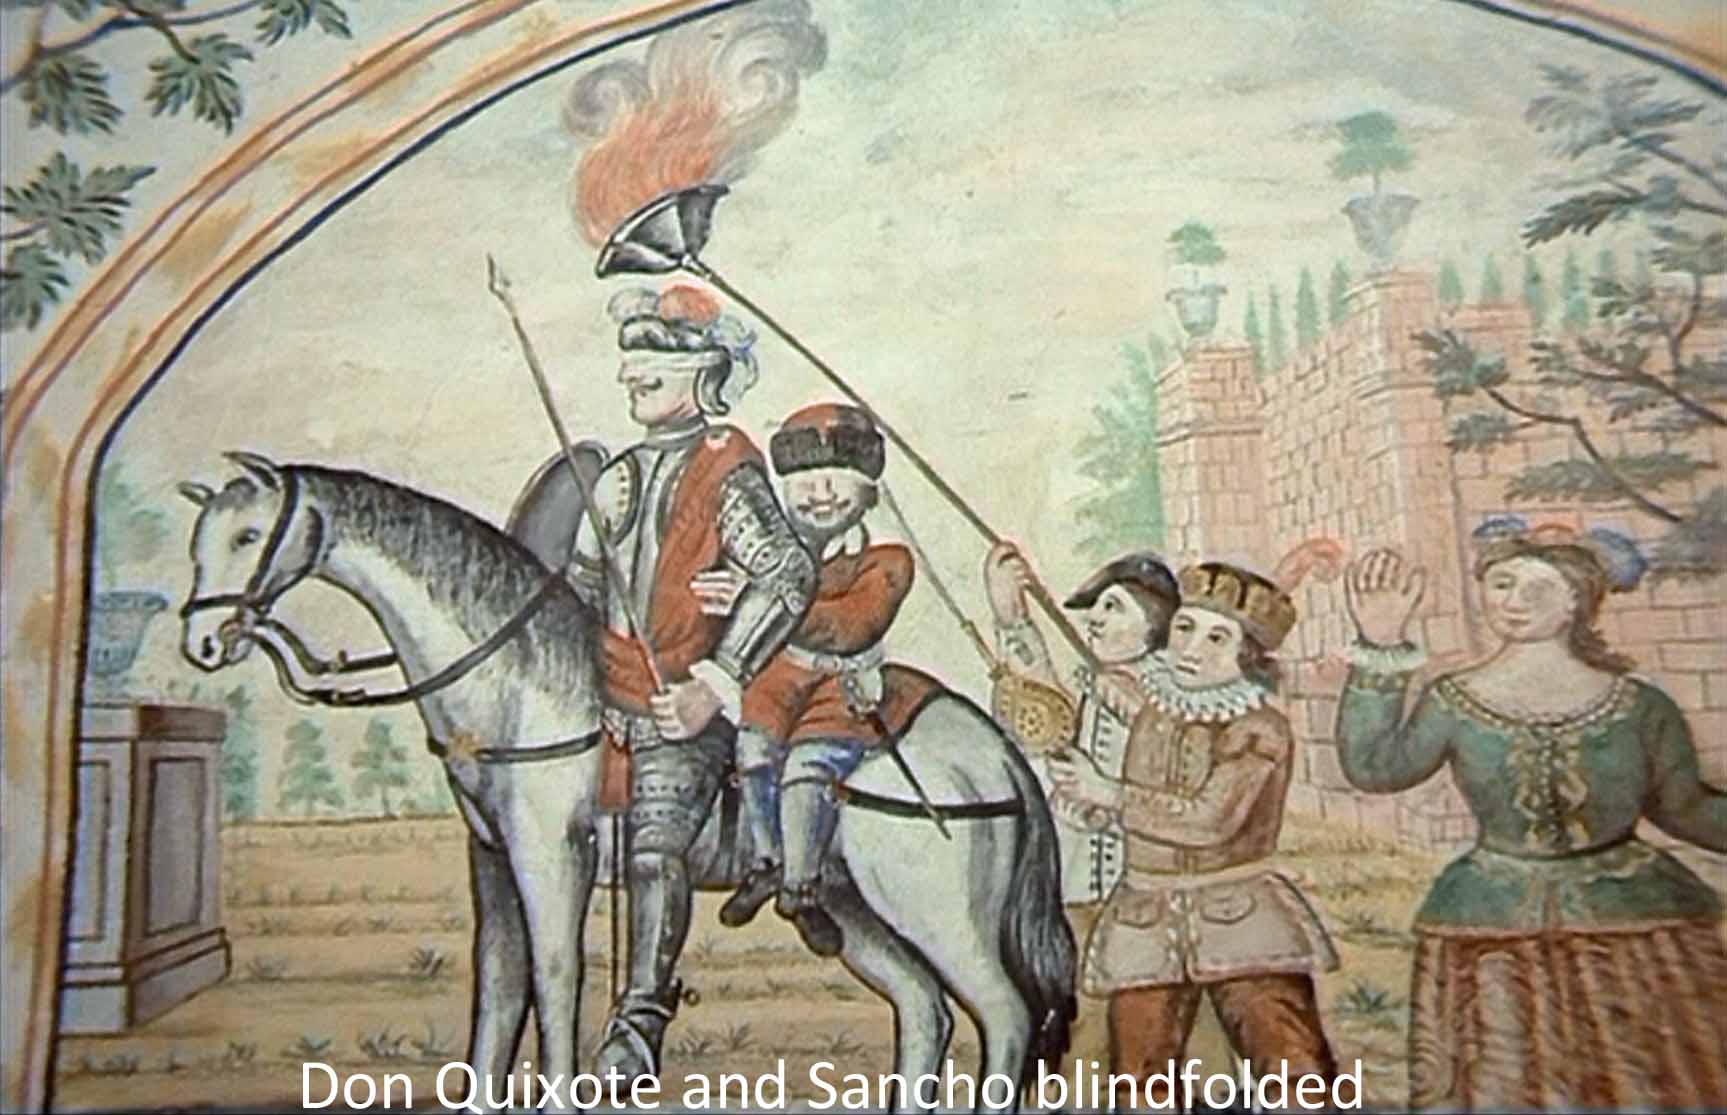 Don Quixote and Sancho blindfolded